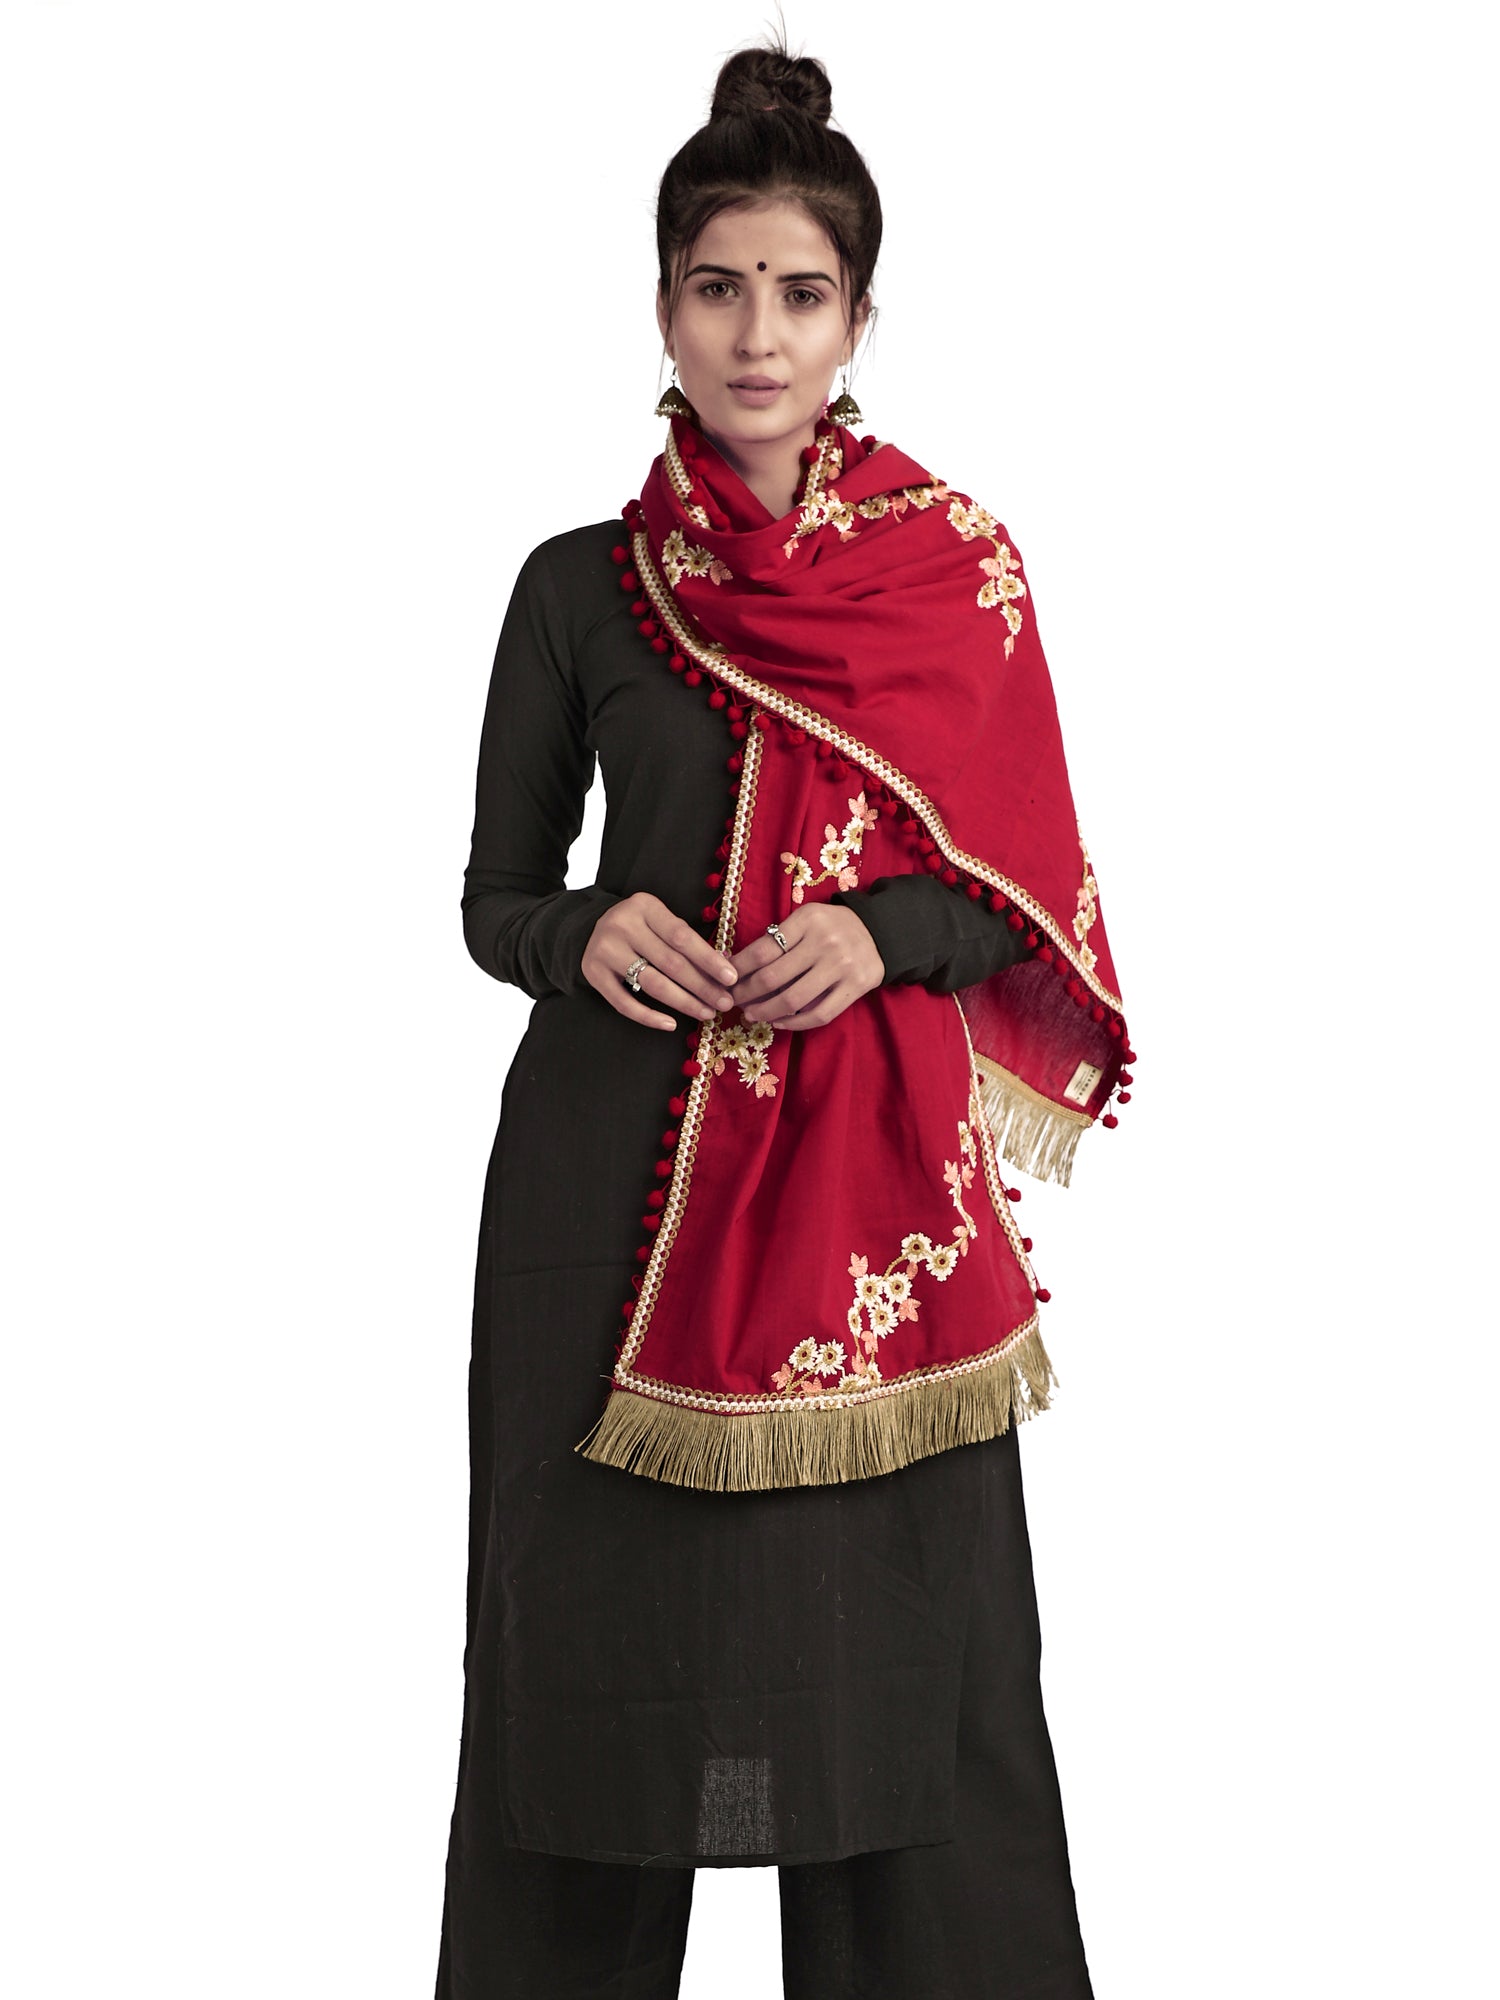 Women's  Pure Khadi Blood Red Embroidered stole or Dupatta - MESMORA FASHION